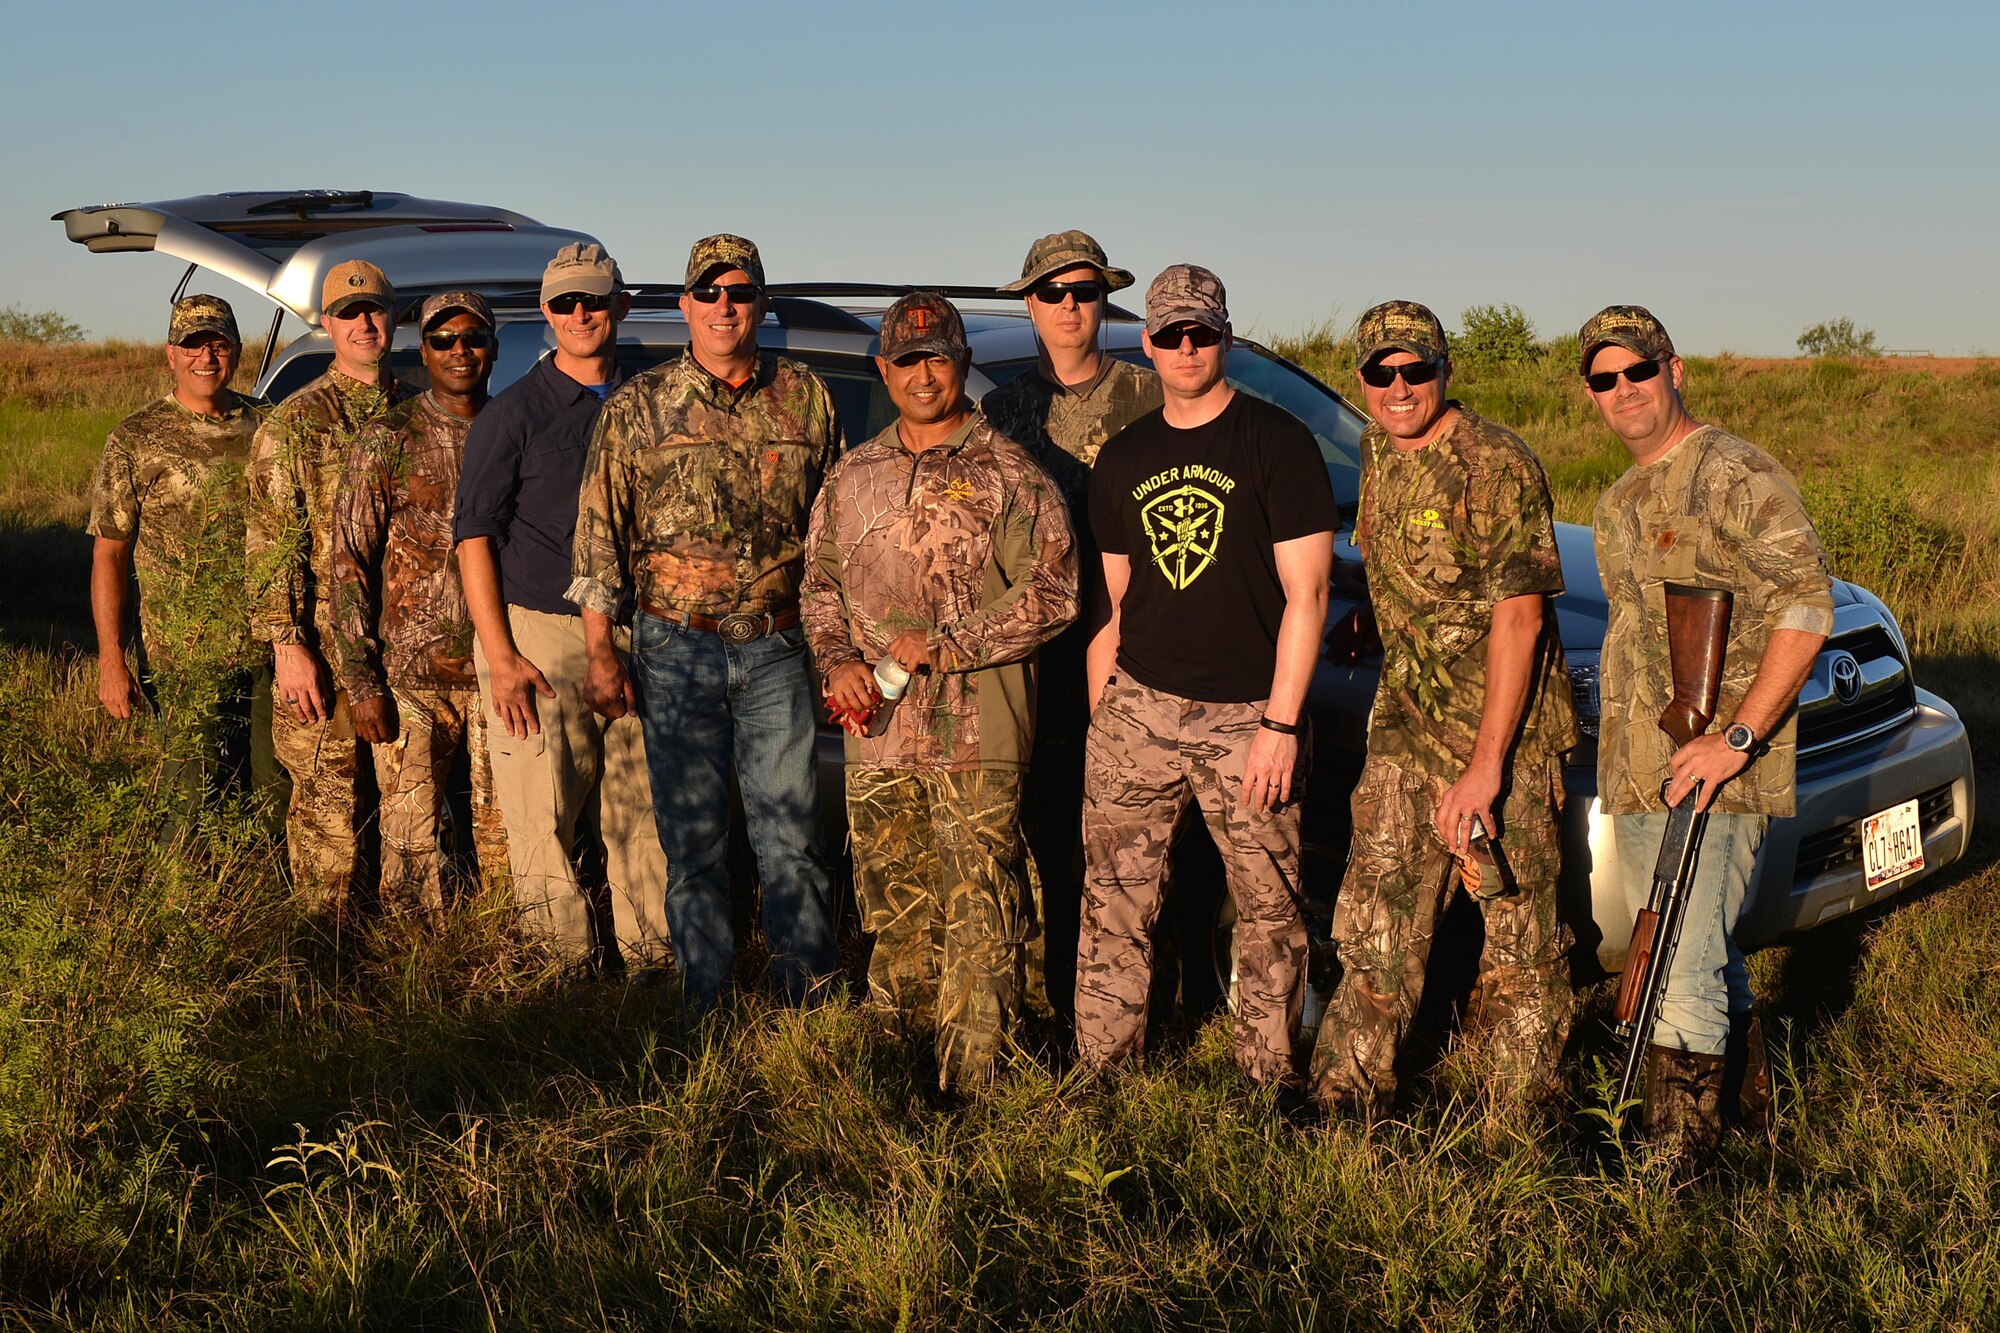 Brig. Gen. Patrick Doherty, 82nd Training Wing commander, and Chief Master Sgt. Joseph Pritchard, 82nd TRW command chief, stand with base leadership after their dove hunt in Henrietta, Texas, Sept. 10, 2016. Nearly 175 Airmen were invited to the 12th Annual Clay County Dove Salute at the Birdwell and Clark Ranch. (U.S. Air Force photo by Senior Airman Kyle E. Gese)